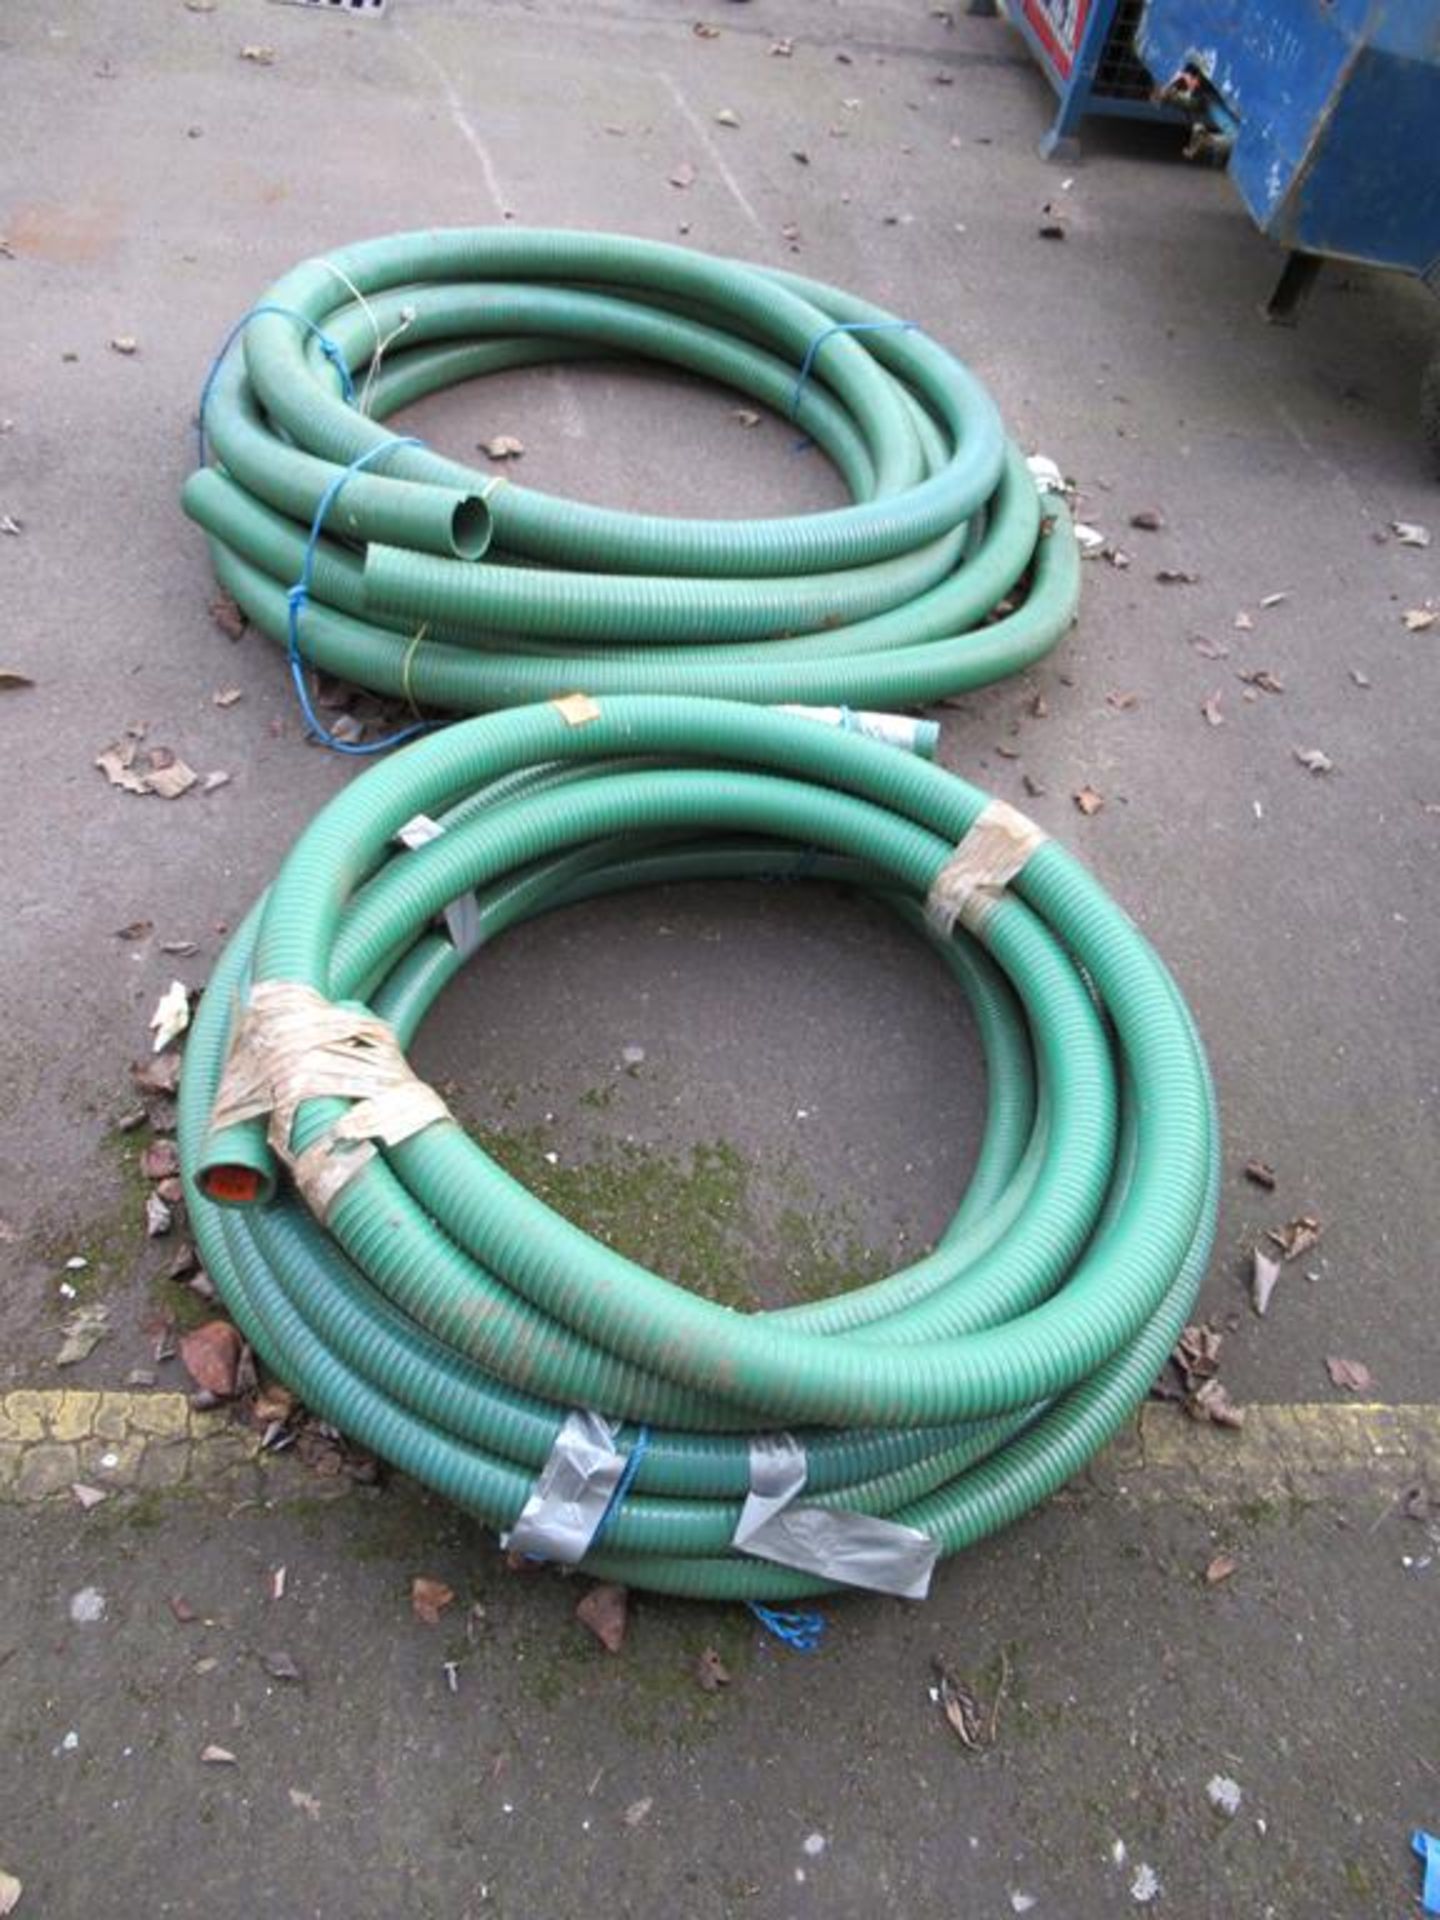 2 x Reels of Green Irrigation Piping - Image 3 of 3